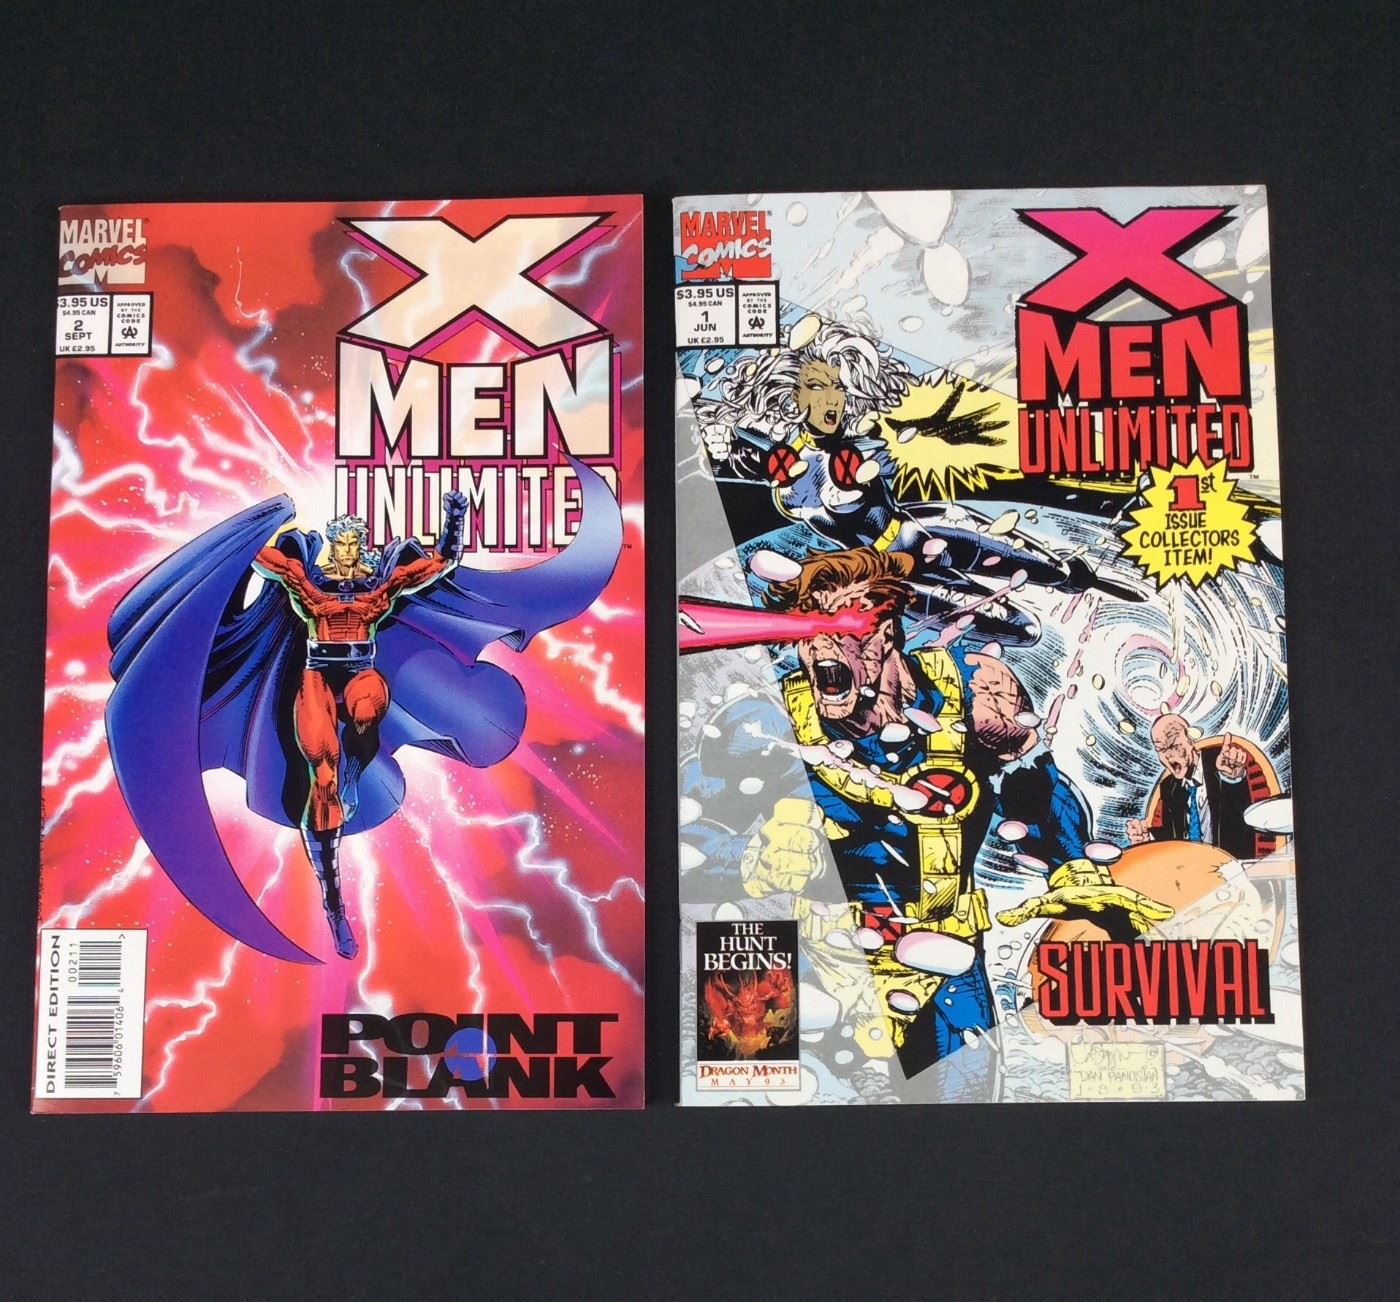 Marvel: X-Men Unlimited No. 1 1st Issue Collector's Item and No. 2